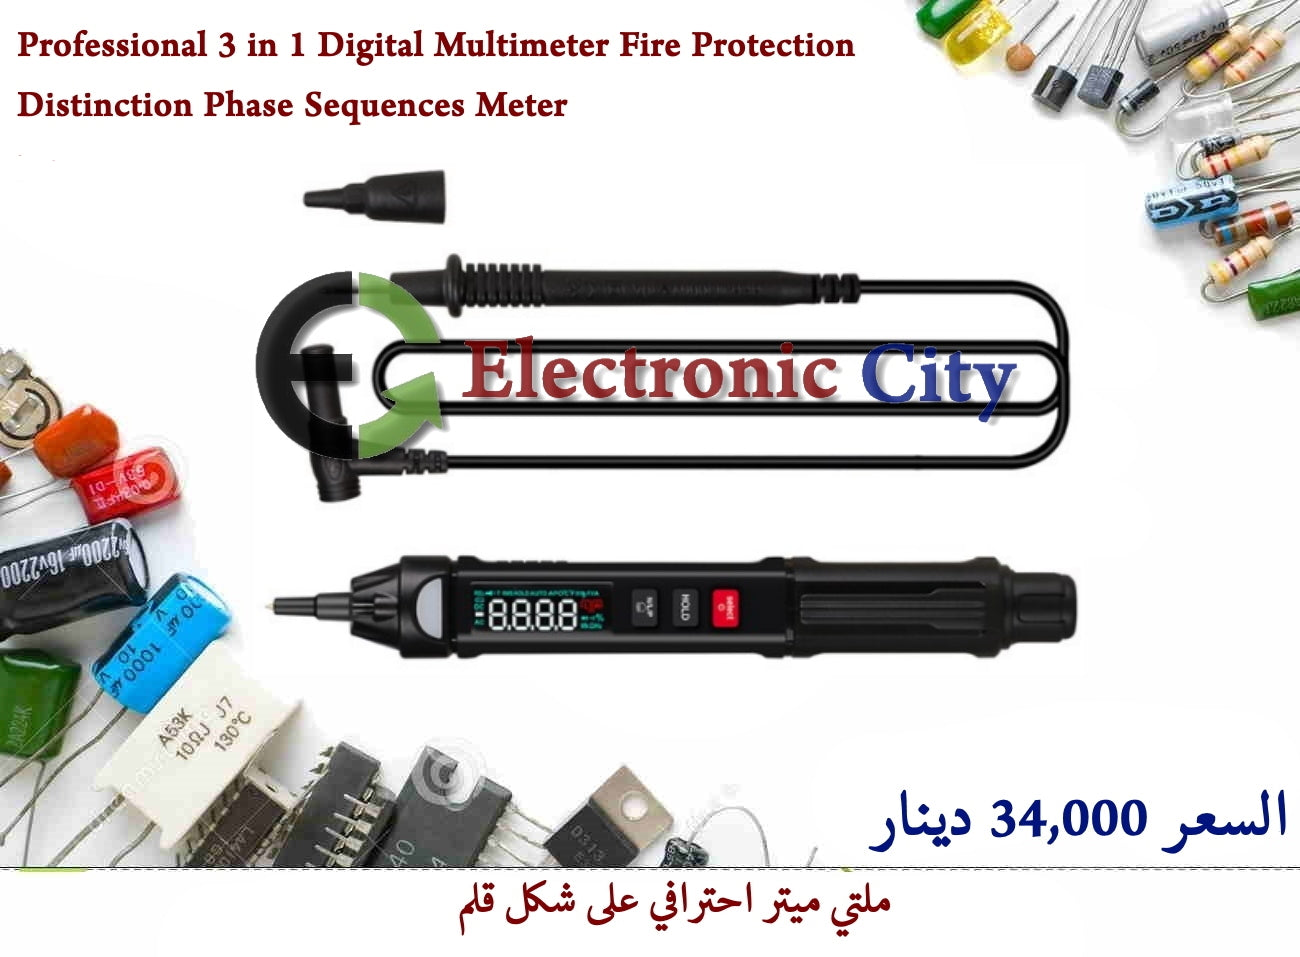 ET8908 Professional 3 in 1 Digital Multimeter Fire Protection Distinction Phase Sequences Meter